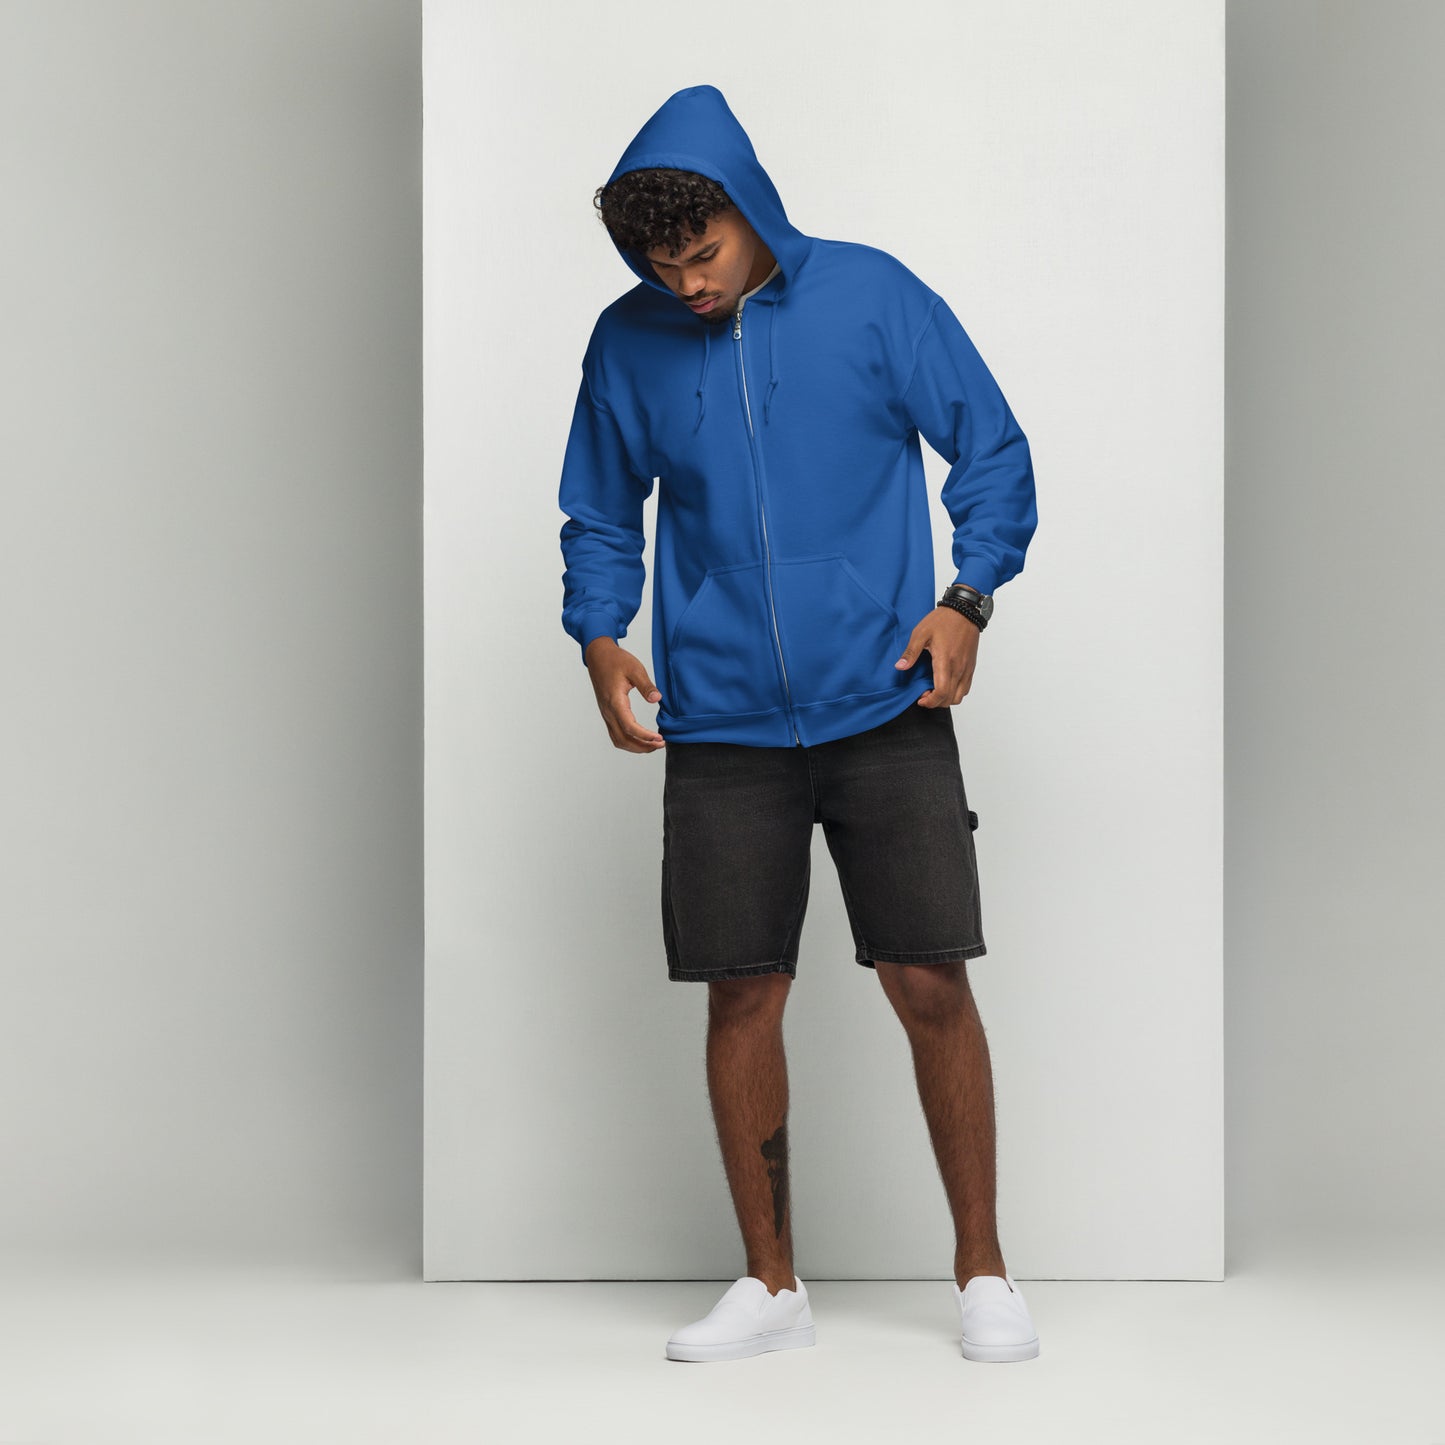 Limerence Heavy Harmony Fusion Zip Hoodie - Royal